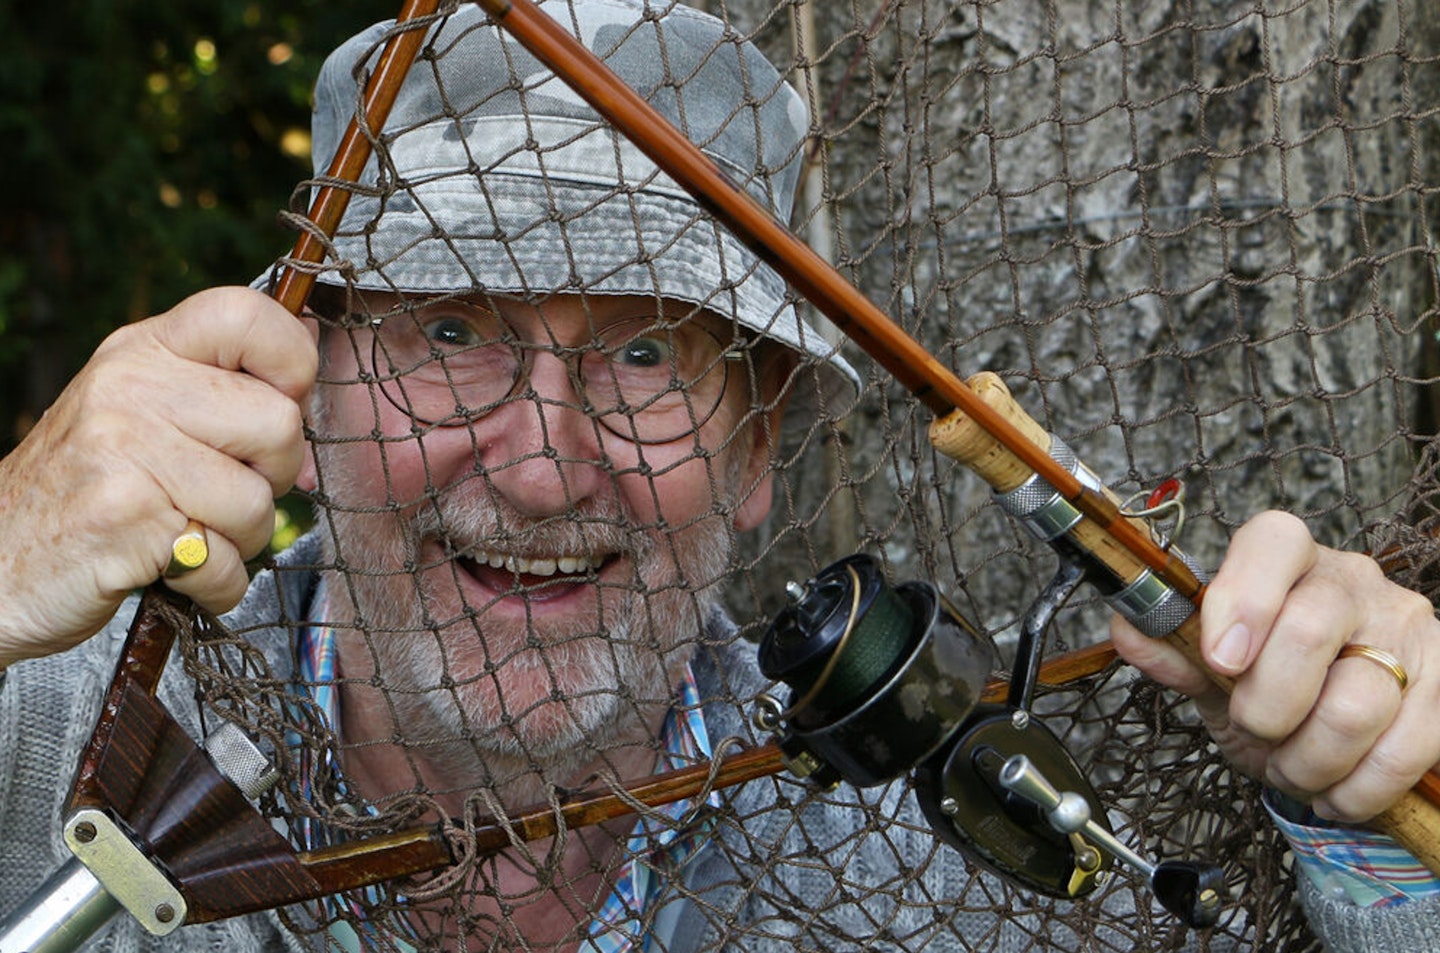 Chris Sandford has reunited the net with Walker’s rod and reel